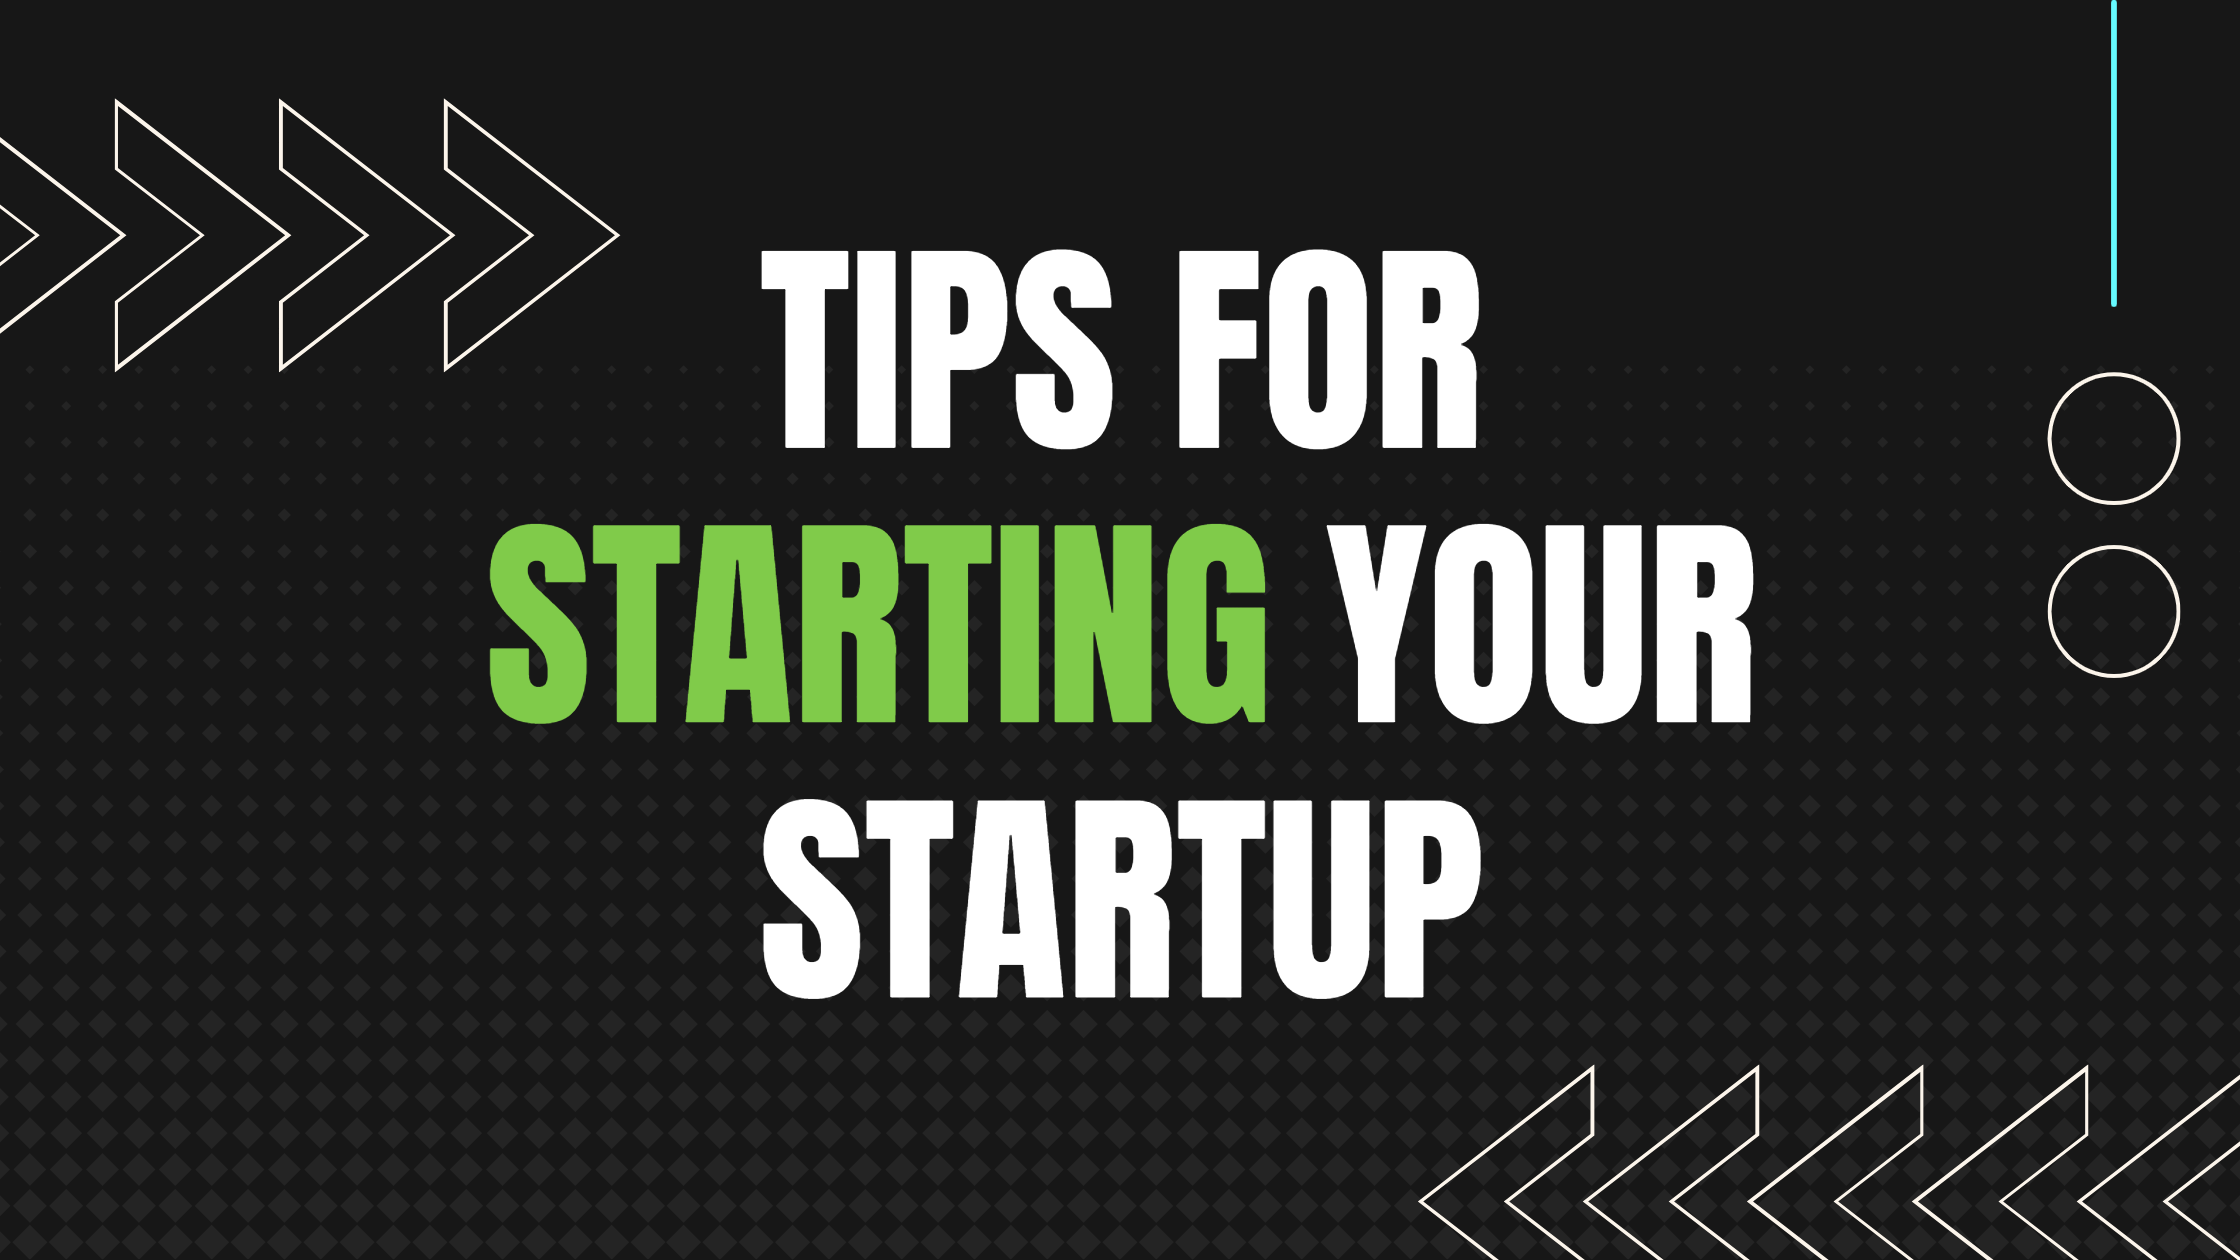 Top 5 Tips For Starting A Startup